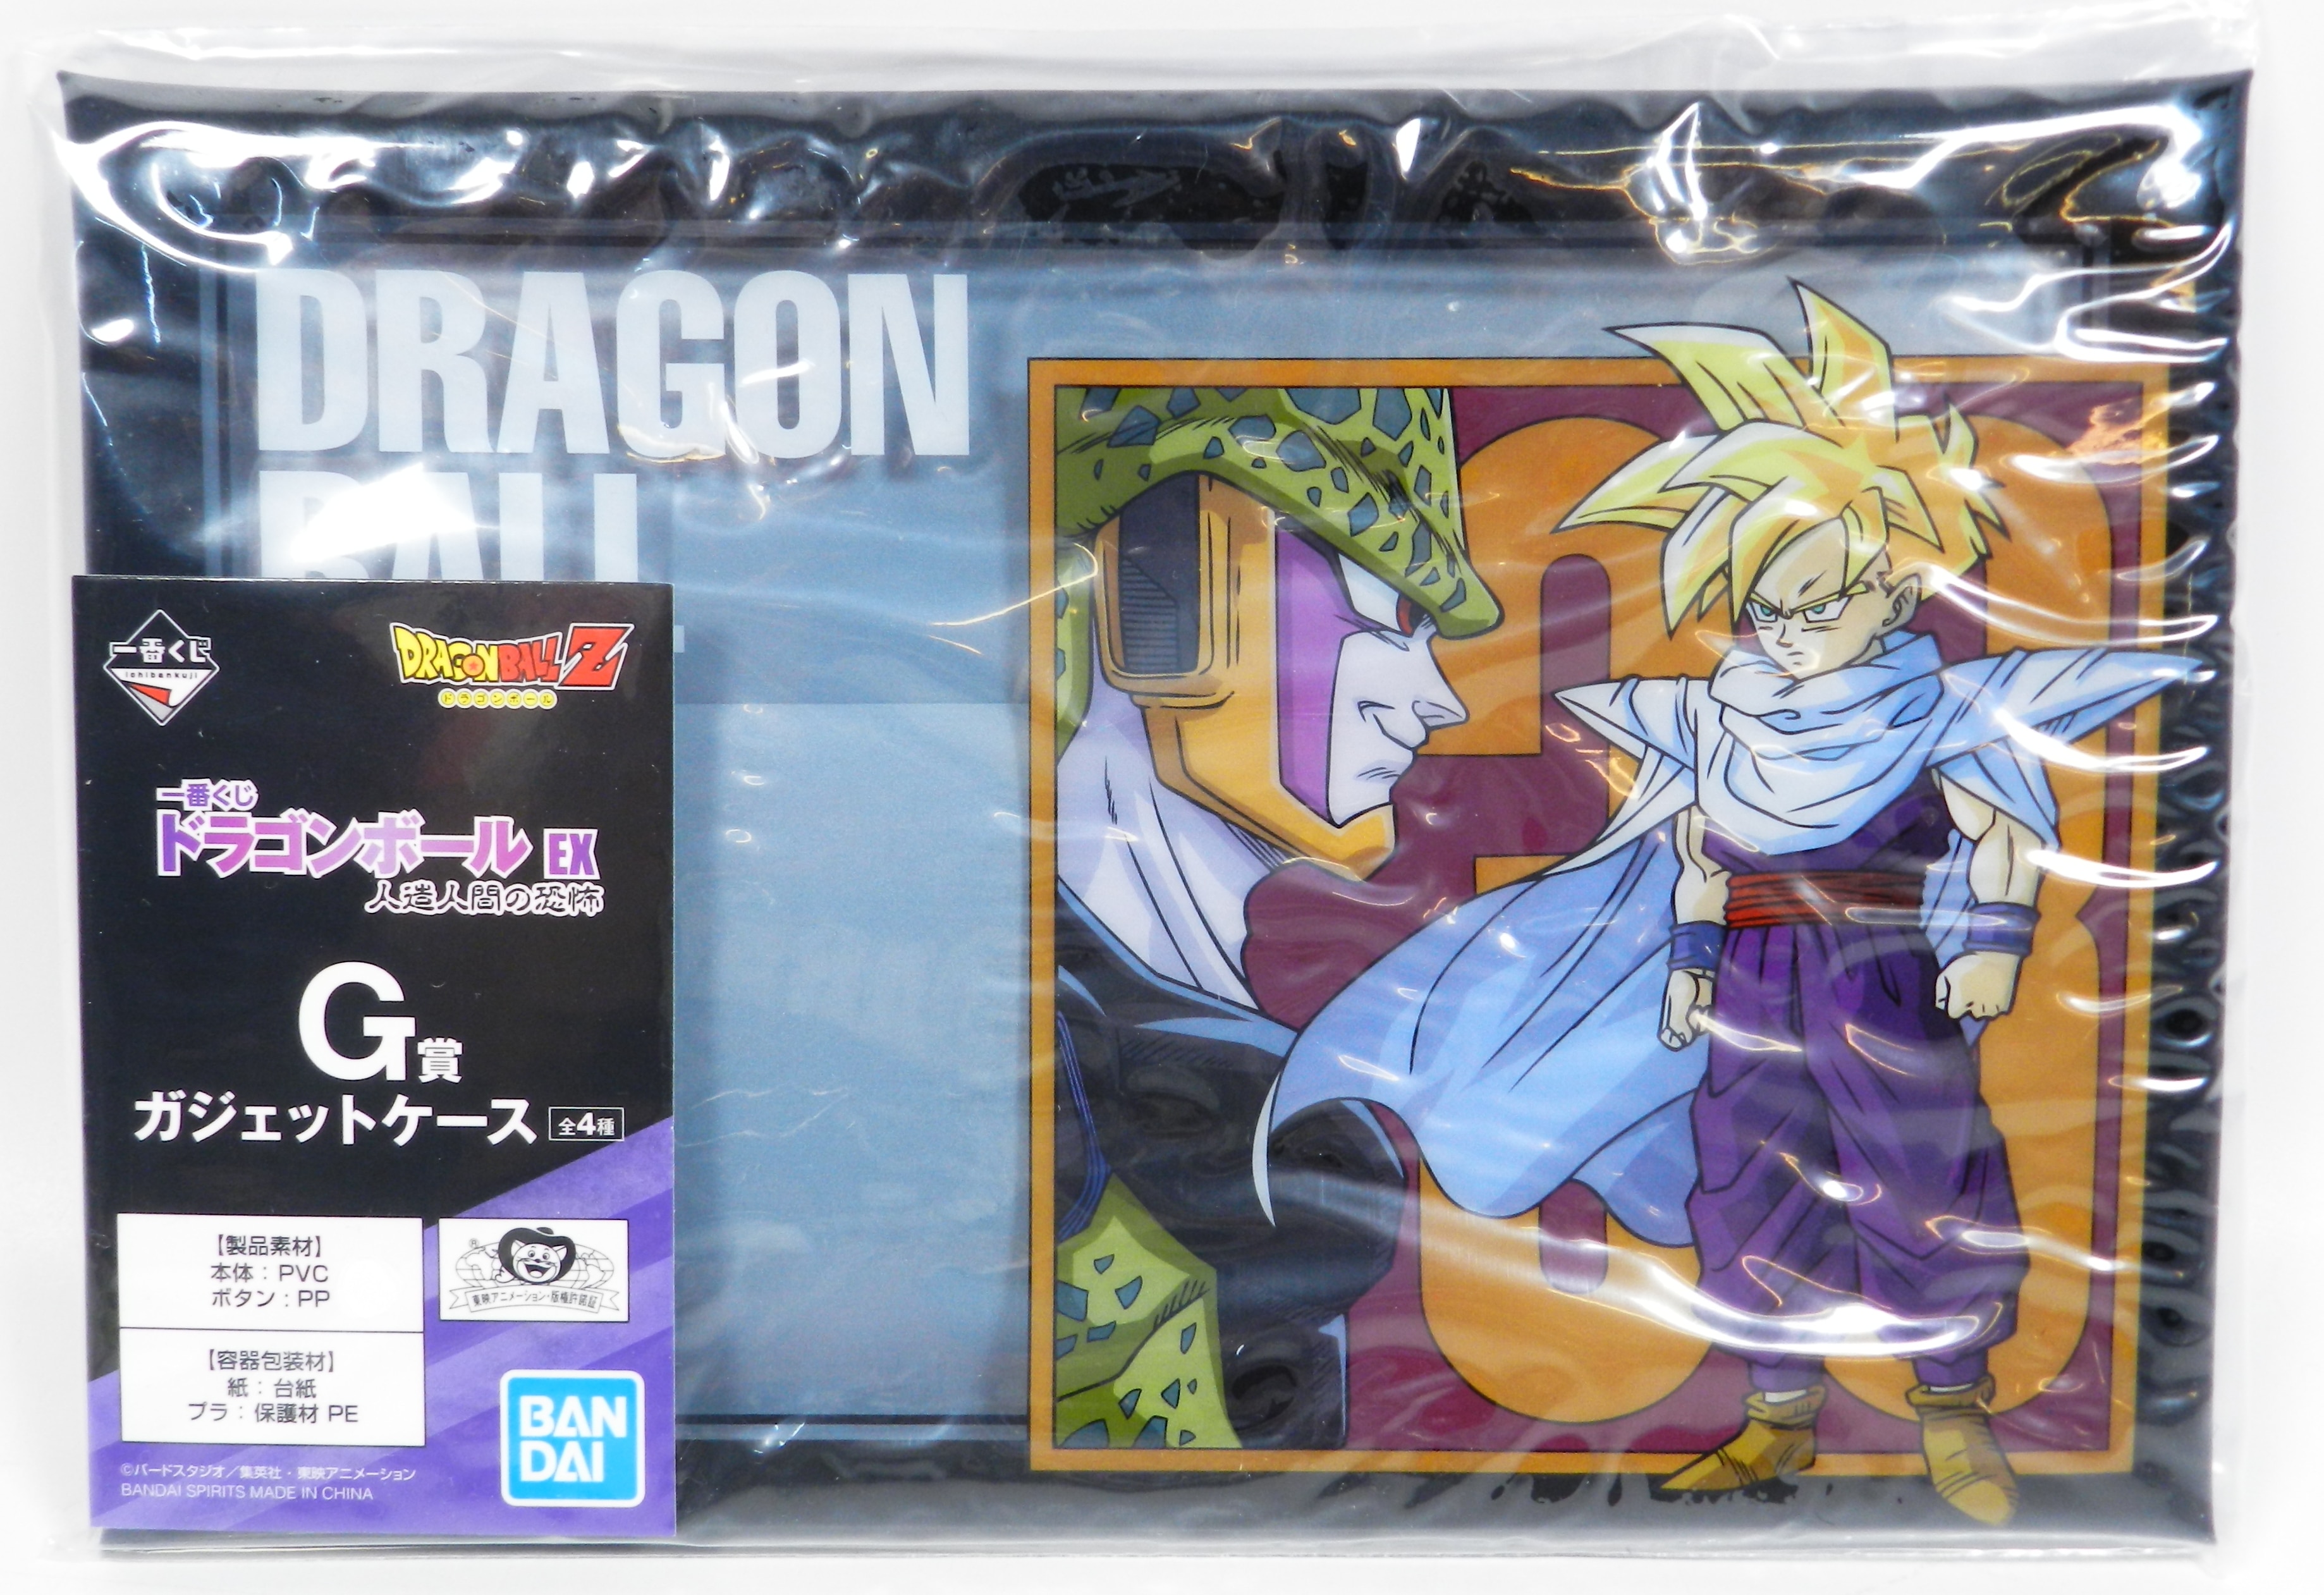 Bandai Spirits Ichiban Kuji Dragon Ball EX Android Fear G Prize Son Gohan  and Cell Complete Gadget Case